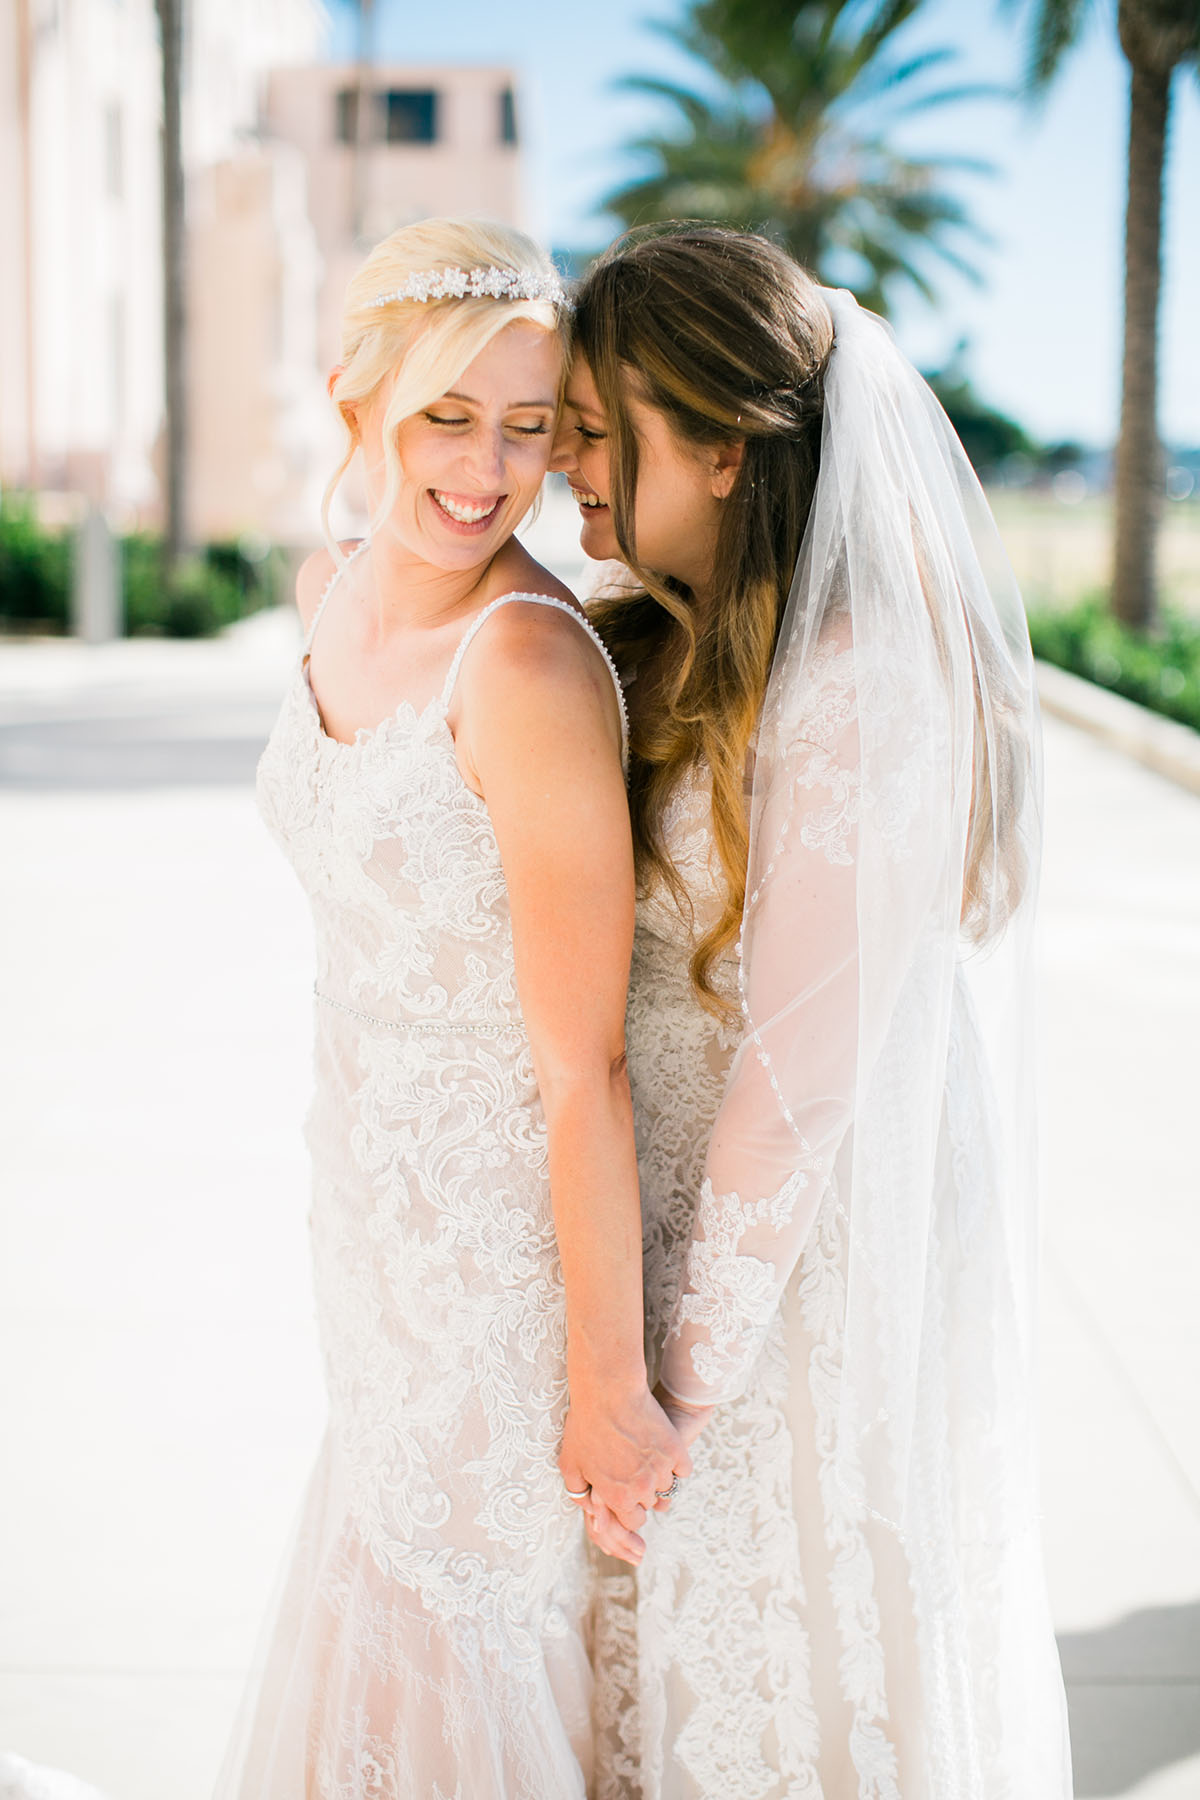 Whimsical, rustic waterfront wedding in San Diego, California two brides LGBTQ+ weddings sunny succulents